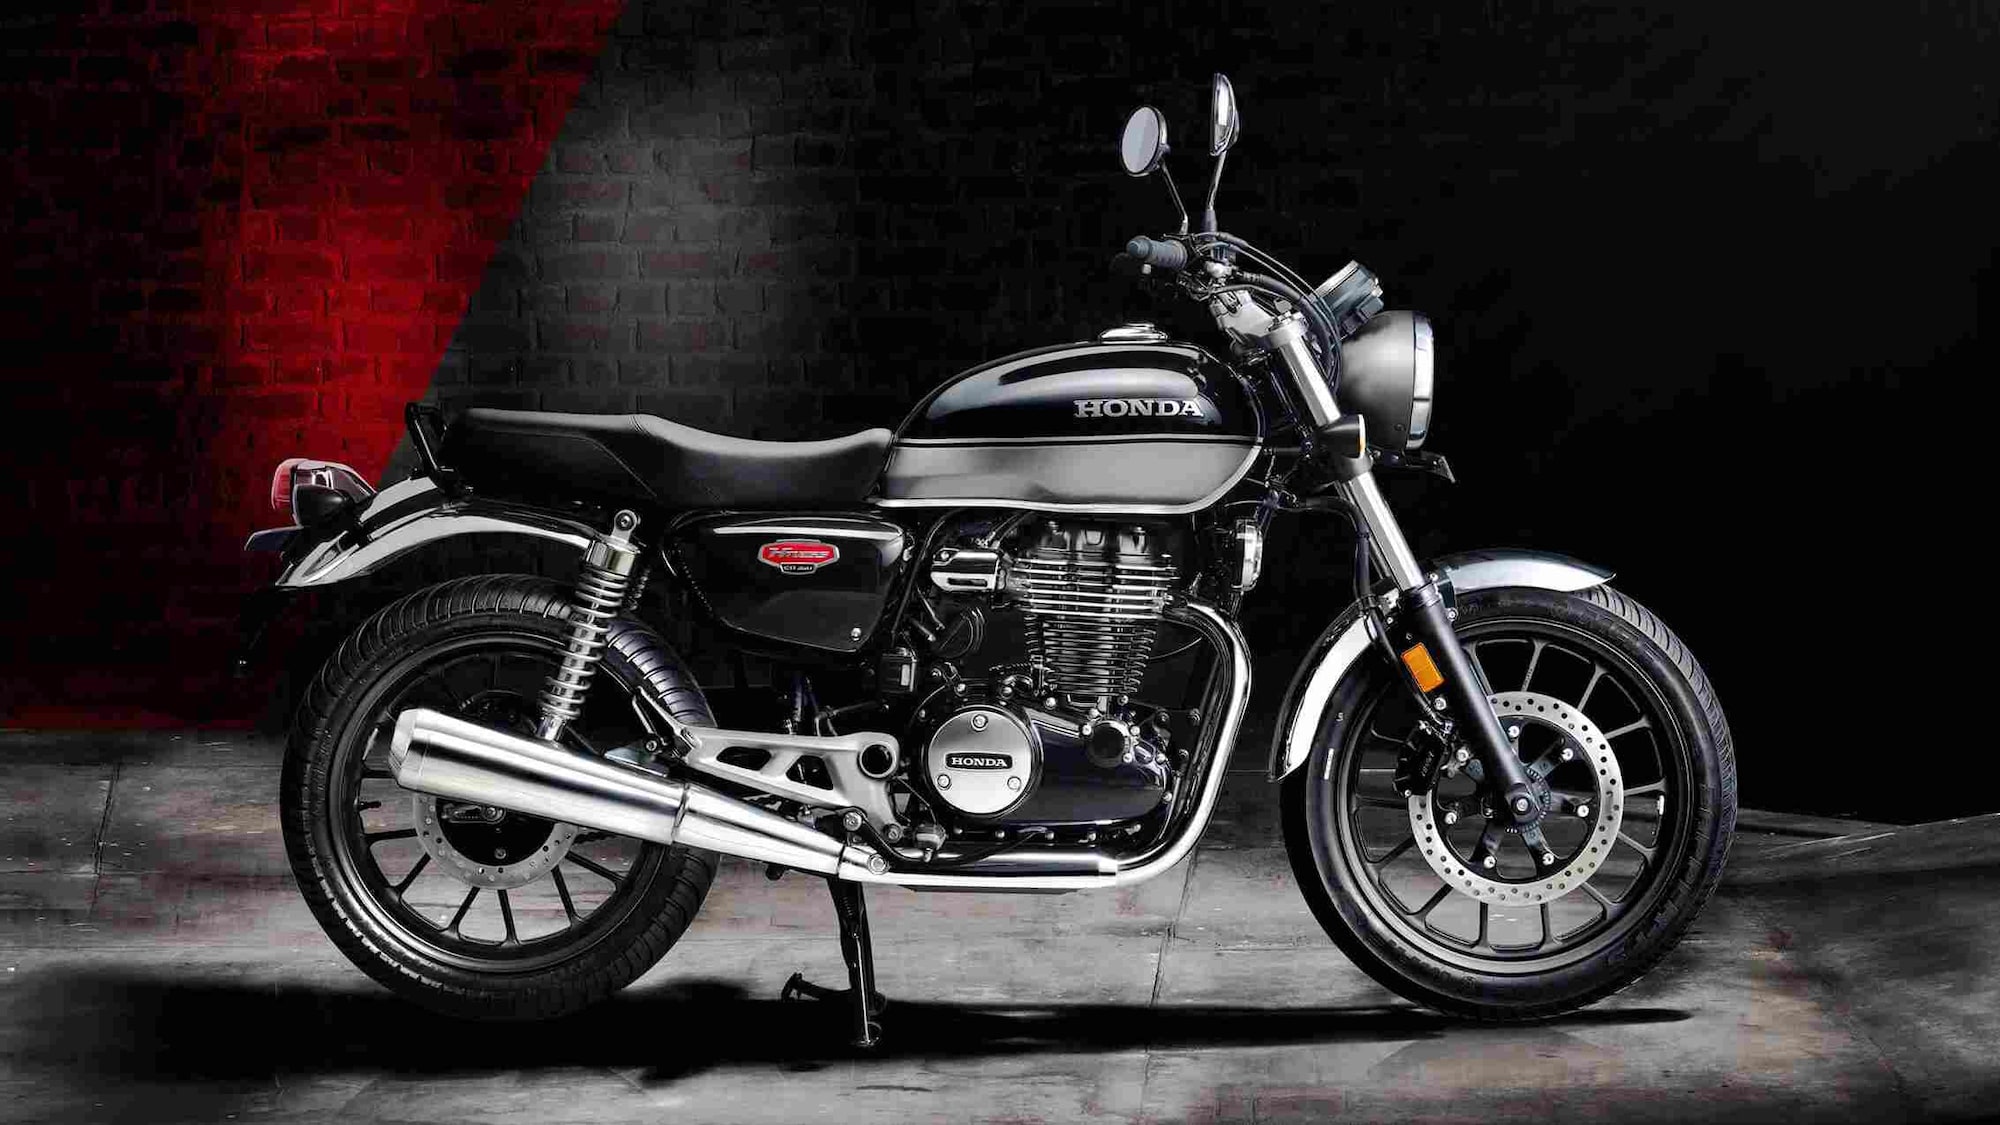  Honda H’ness CB 350 recalled in India to address potential transmission defect